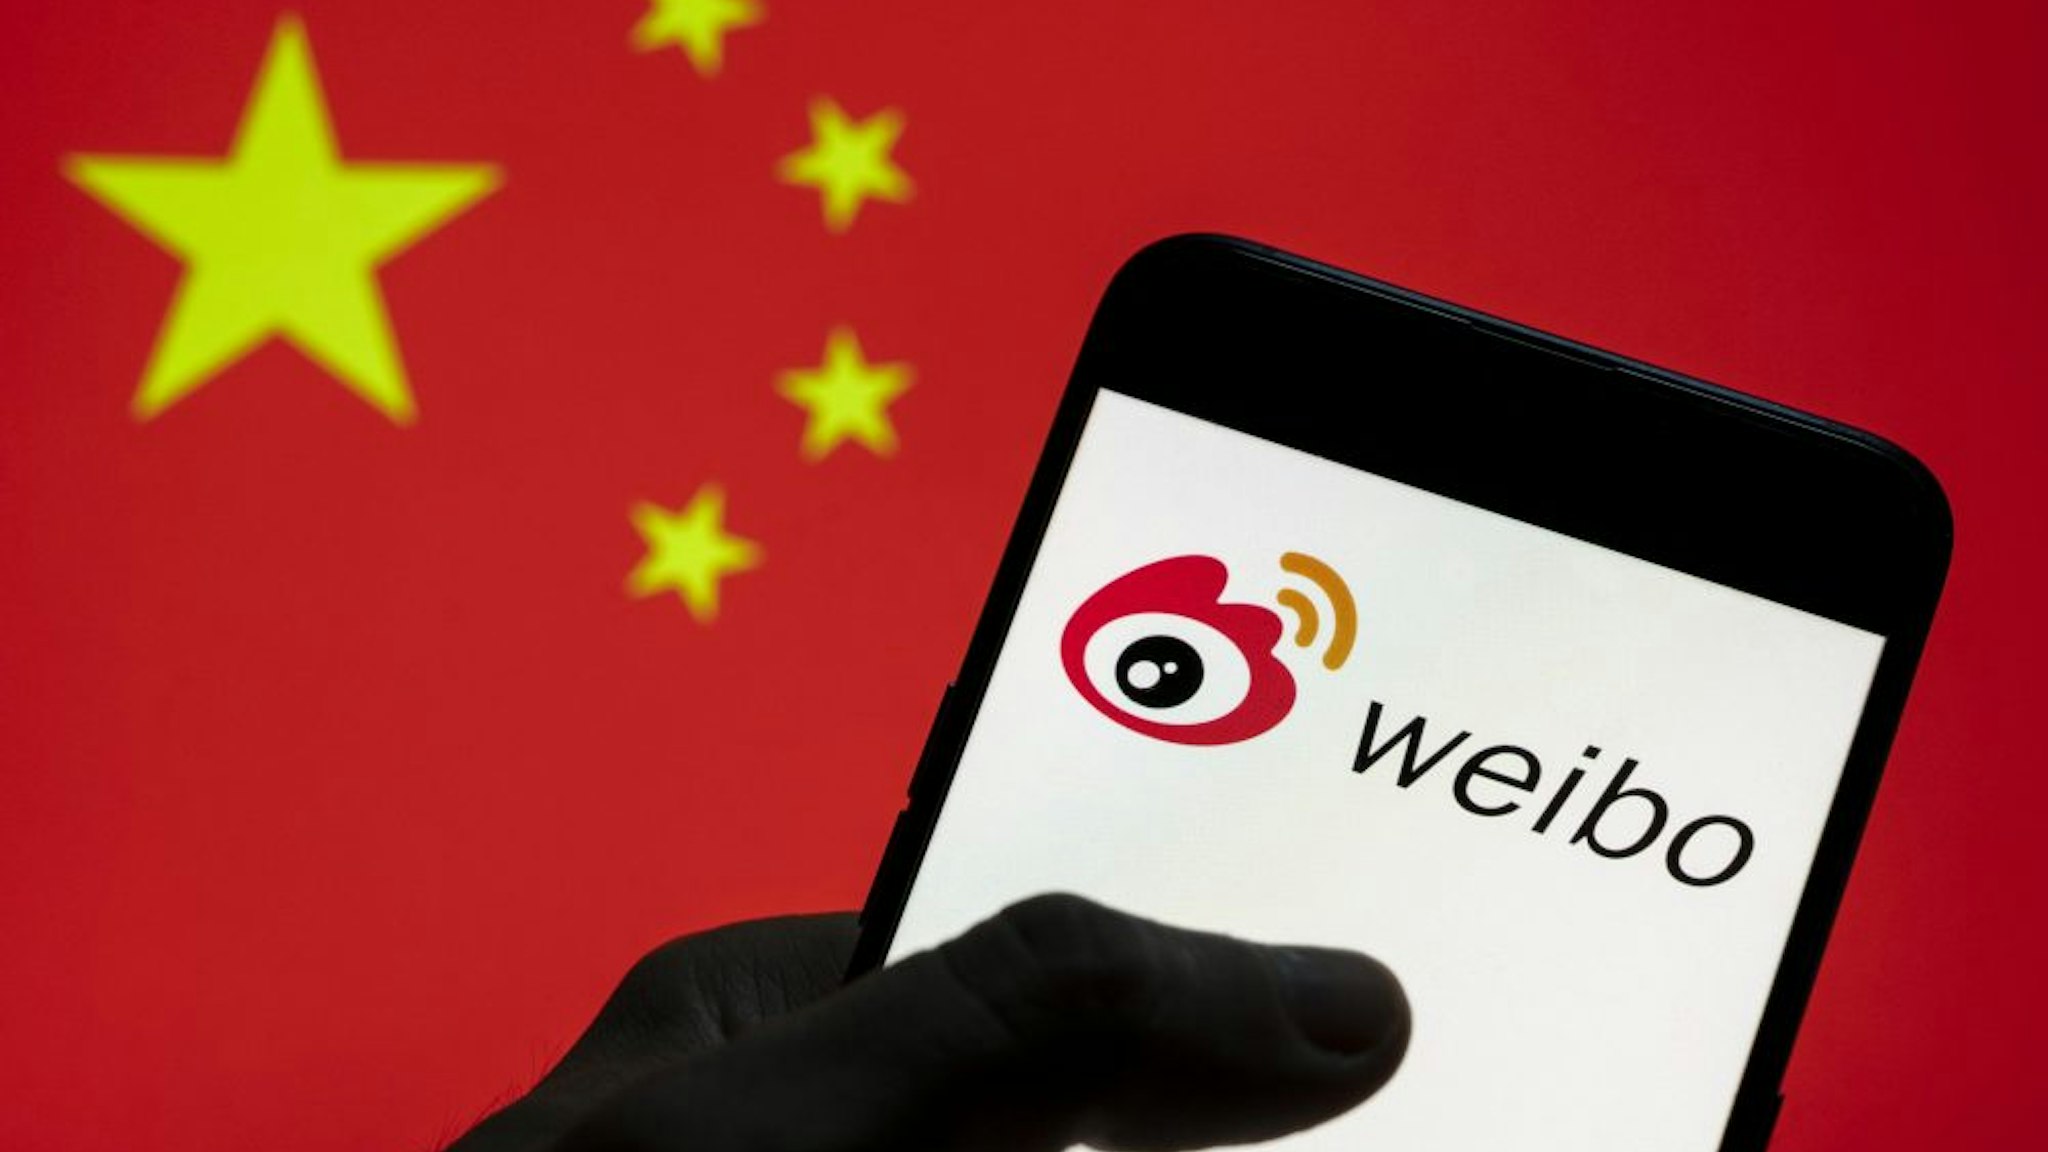 CHINA - 2021/03/28: In this photo illustration the Chinese social media platform Weibo logo seen on an Android mobile device with People's Republic of China flag in the background.